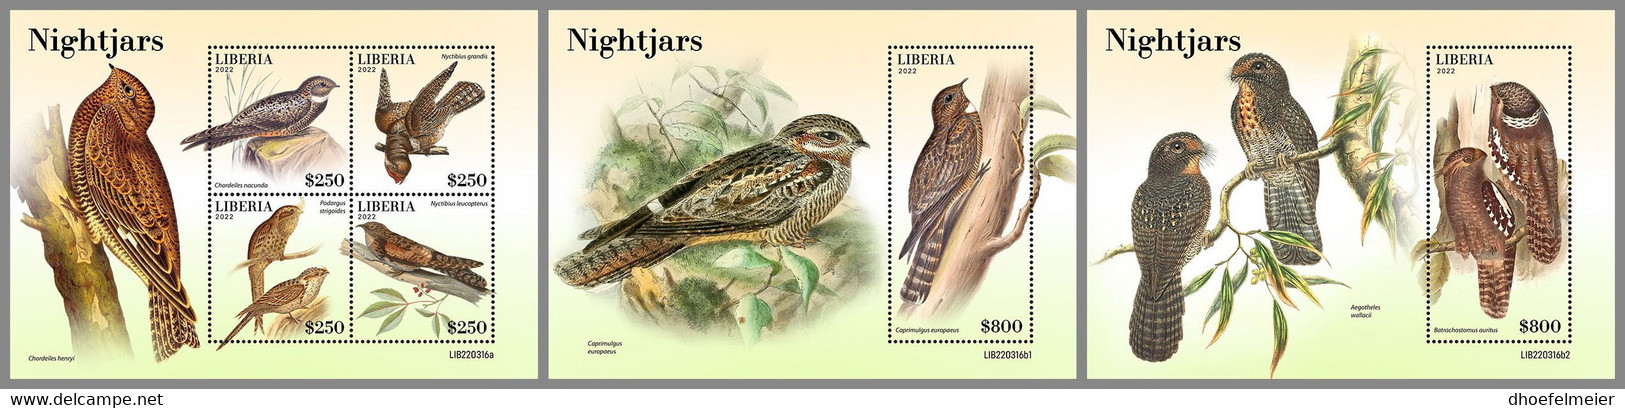 LIBERIA 2022 MNH Nightjars Nachtschwalben Engoulevents M/S+2S/S - OFFICIAL ISSUE - DHQ2249 - Swallows